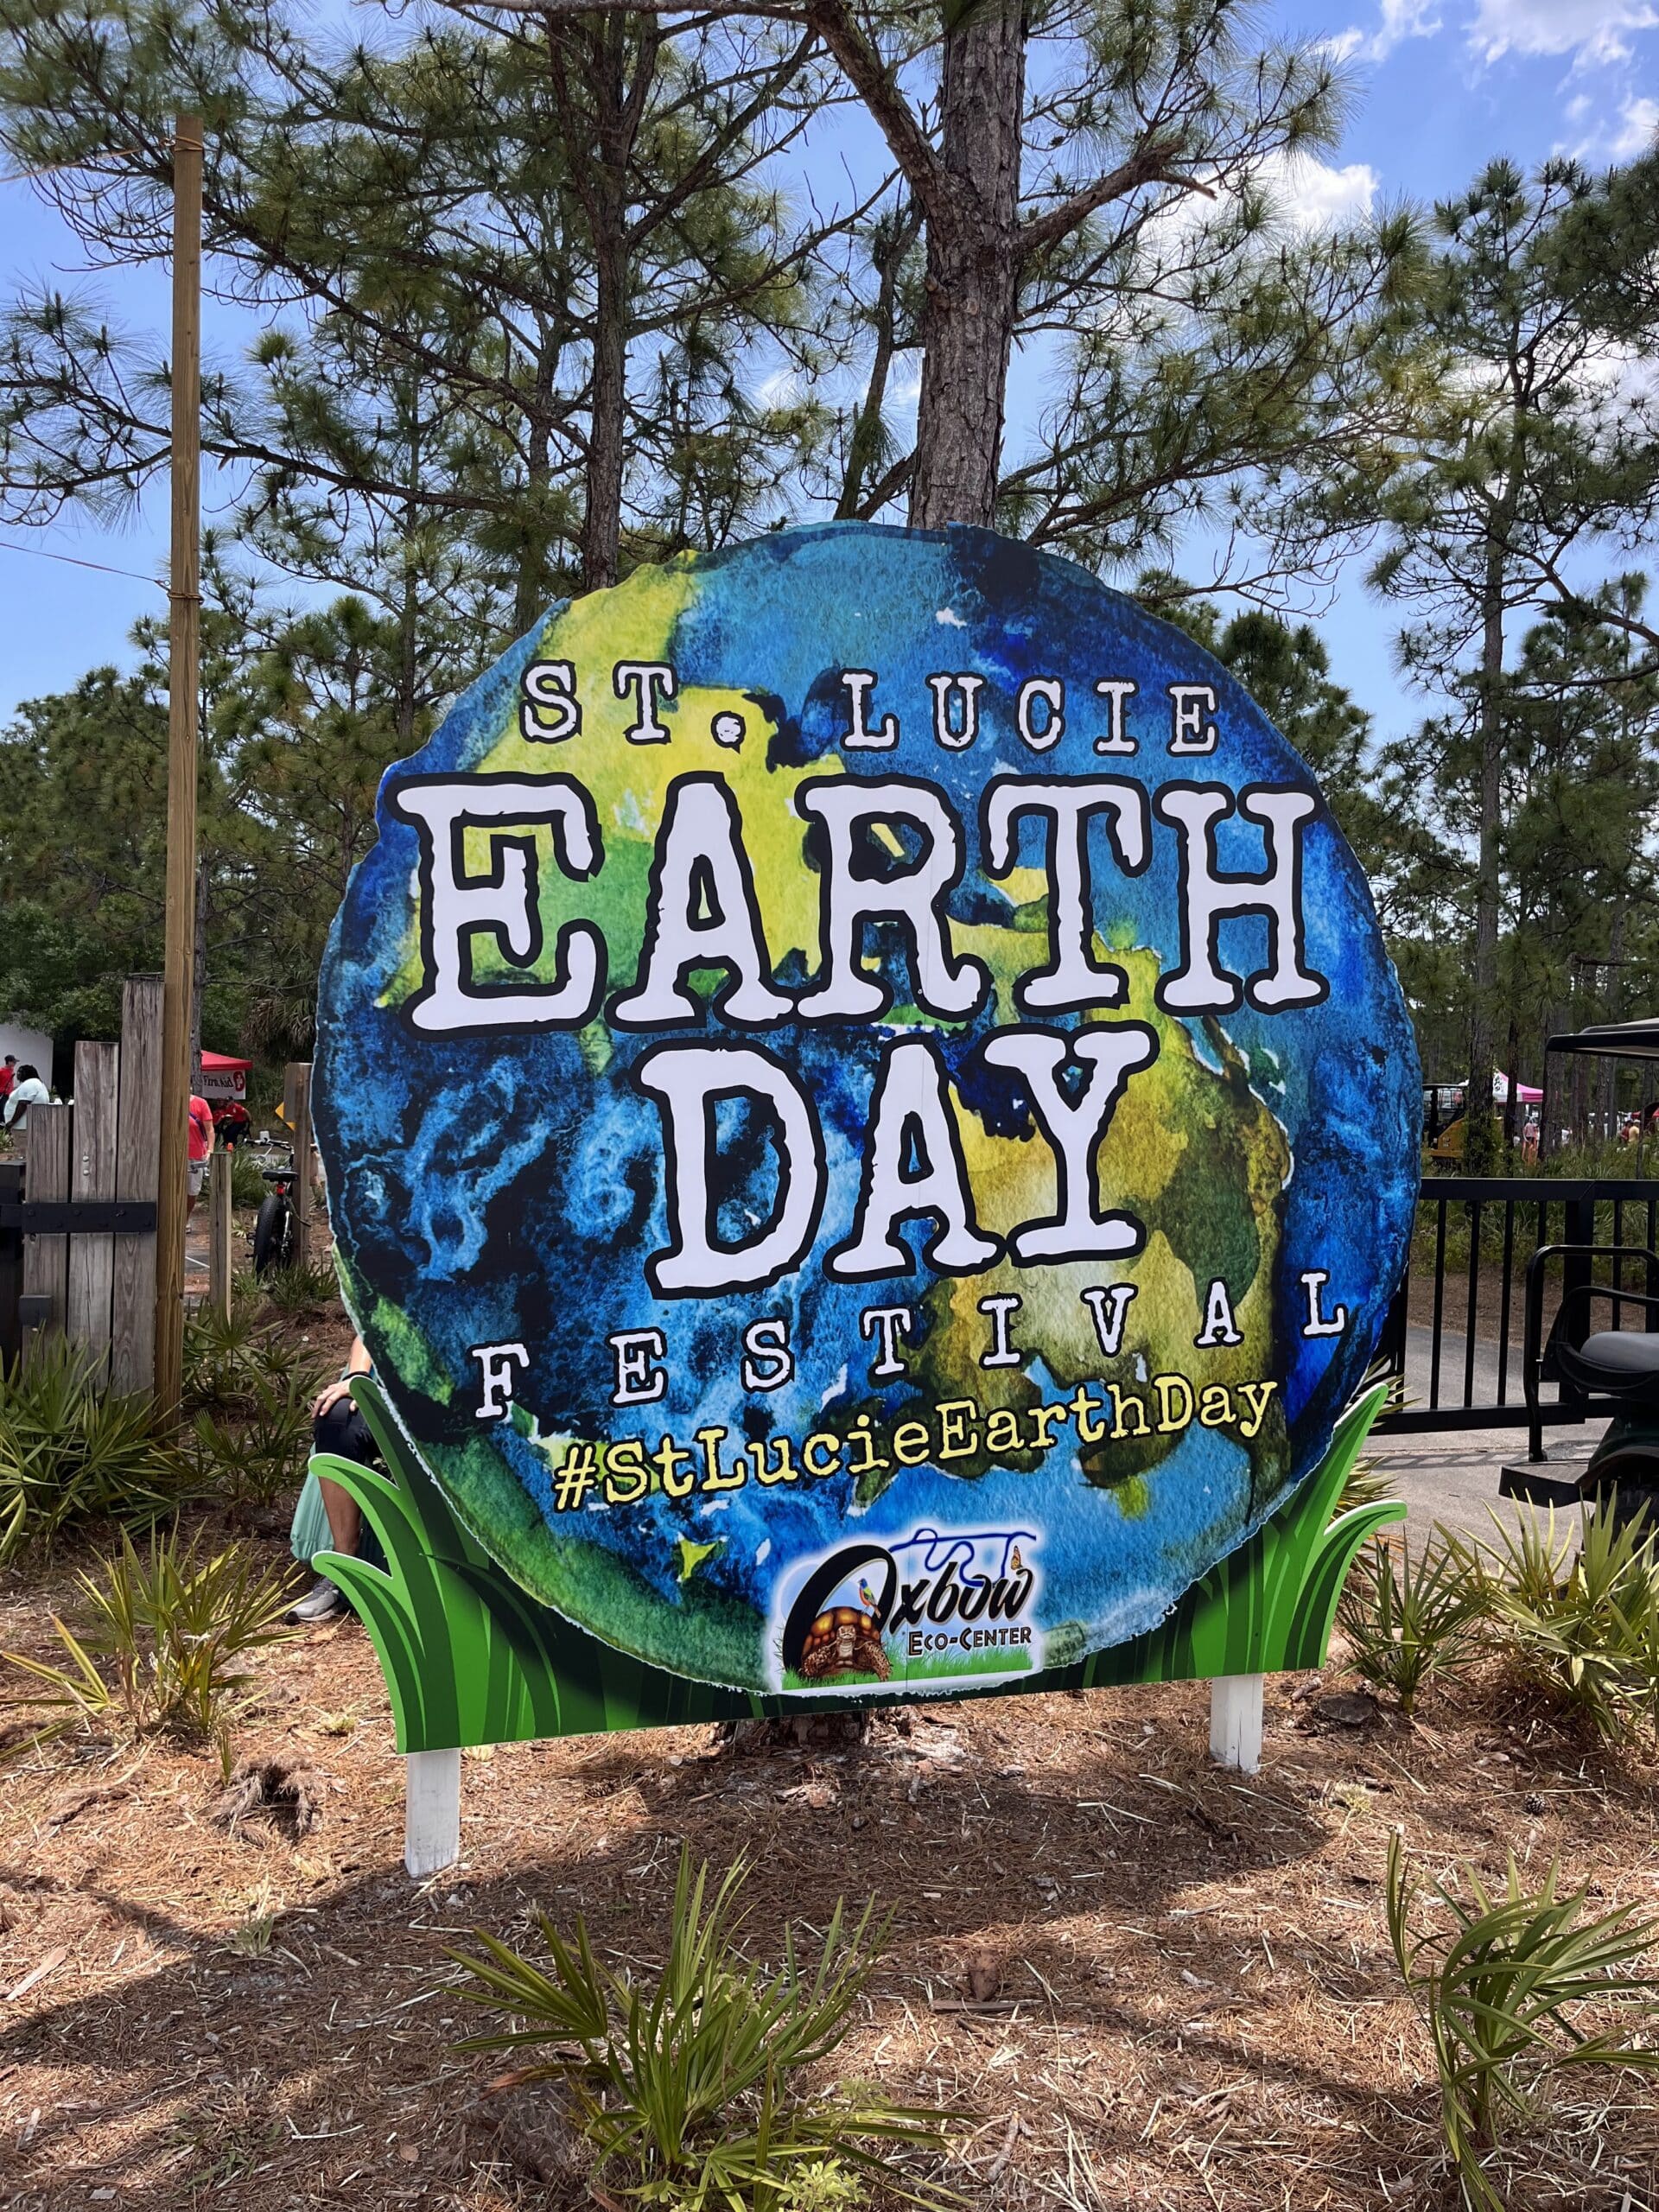 Decorative sign for an Earth Day event